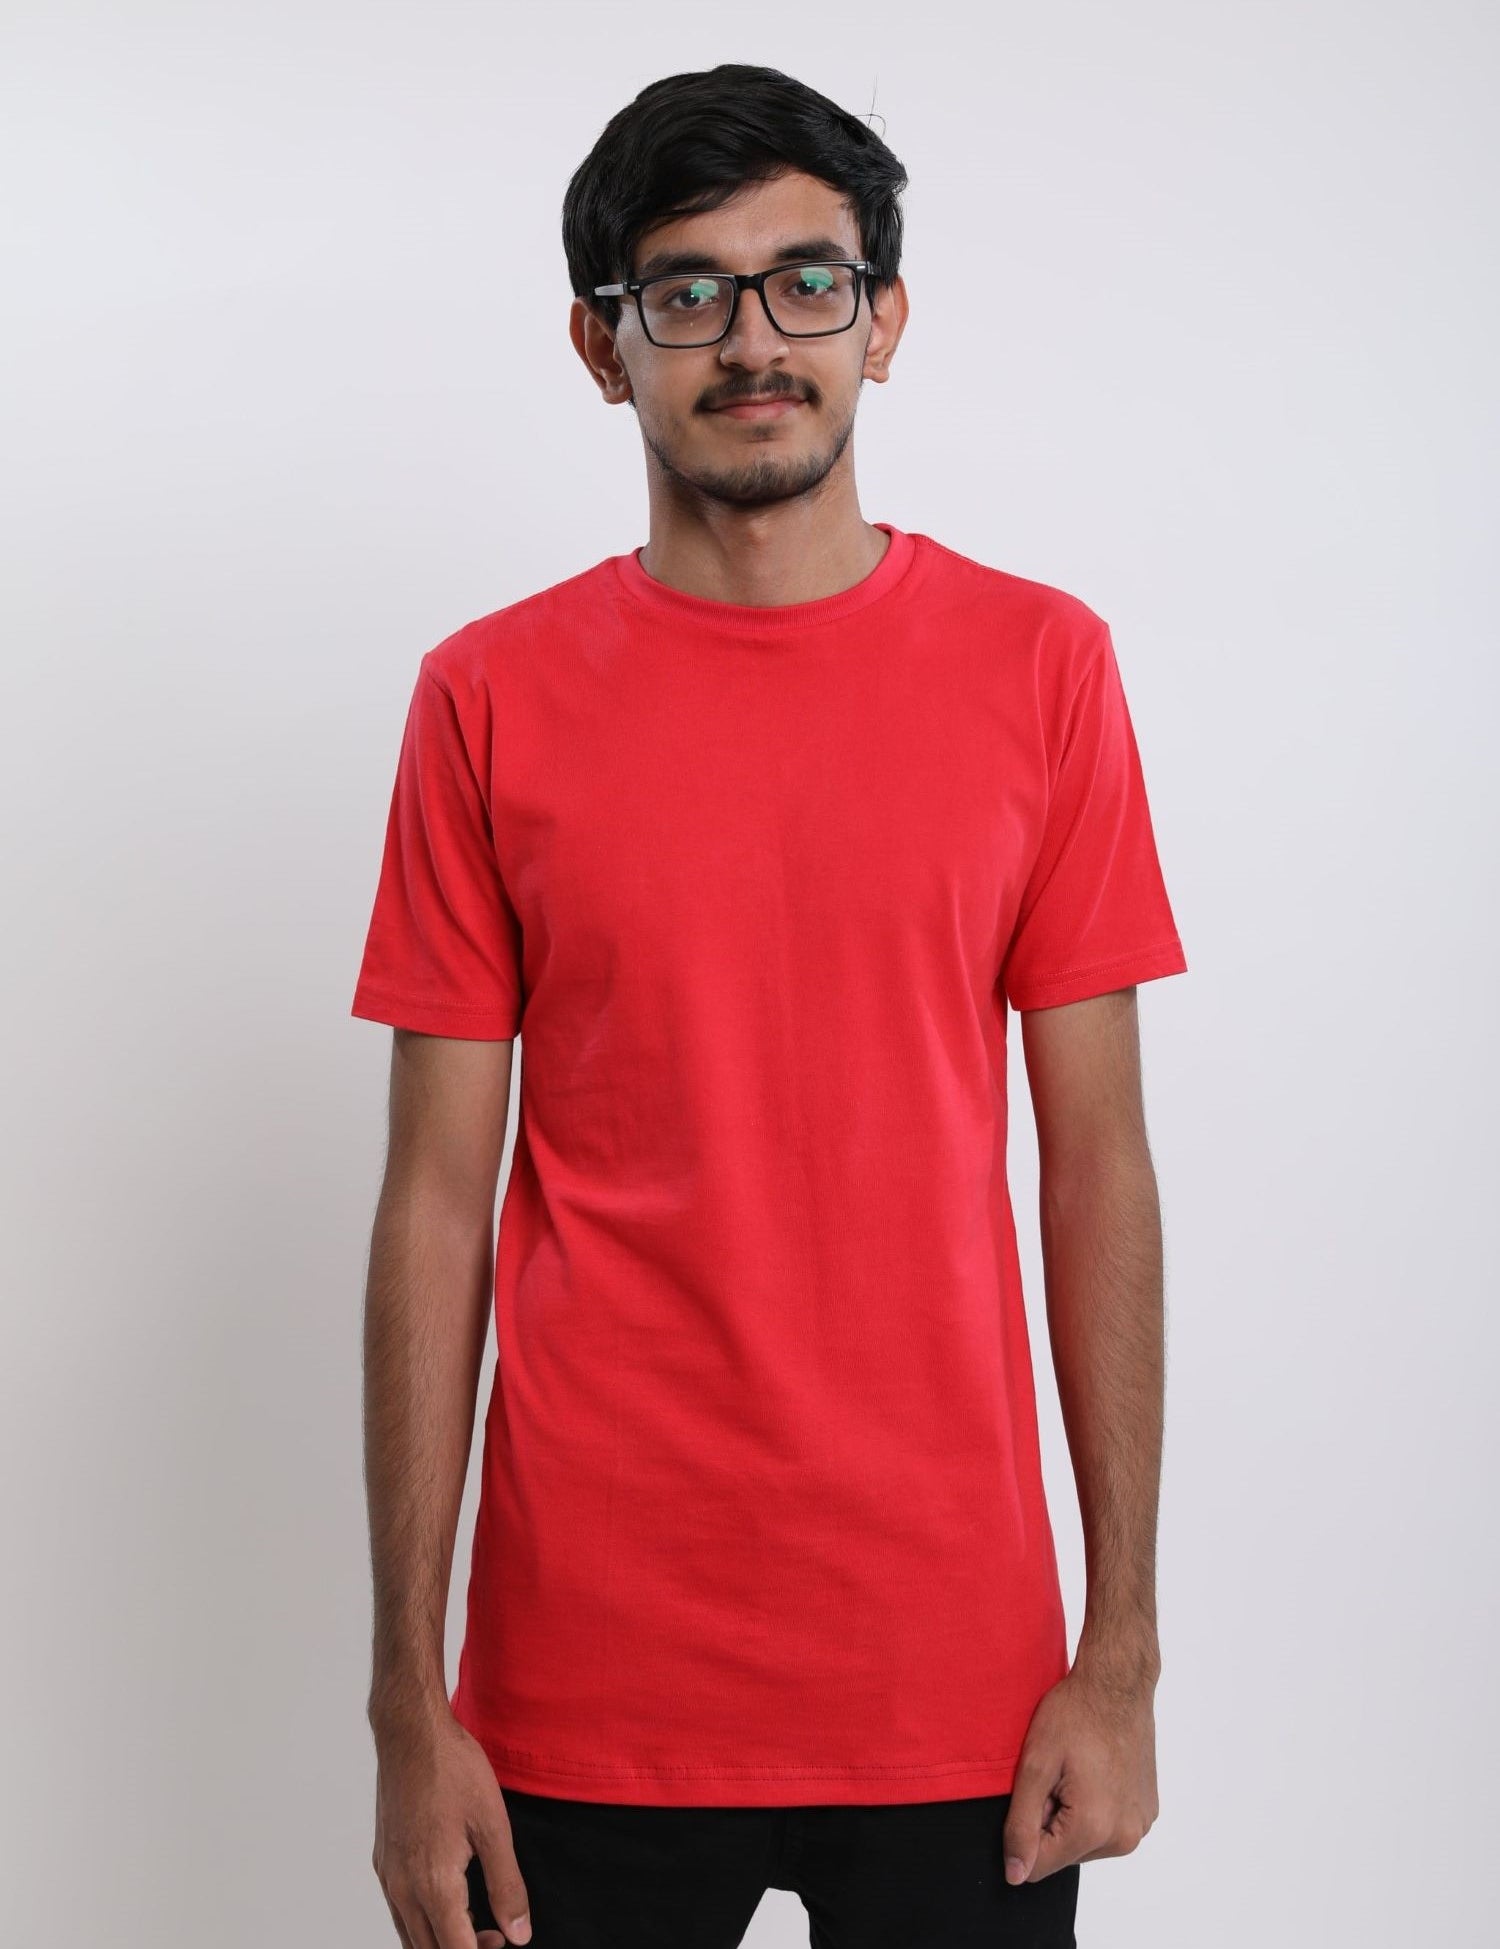 A tall and skinny man in the studio standing in front of a light background. The model is wearing an extra long slim red t-shirt. The red t-shirt features a 3" longer body, 100% organic cotton, and is soft & preshrunk. The red t-shirt is ideal for tall slim men 6'2"+.